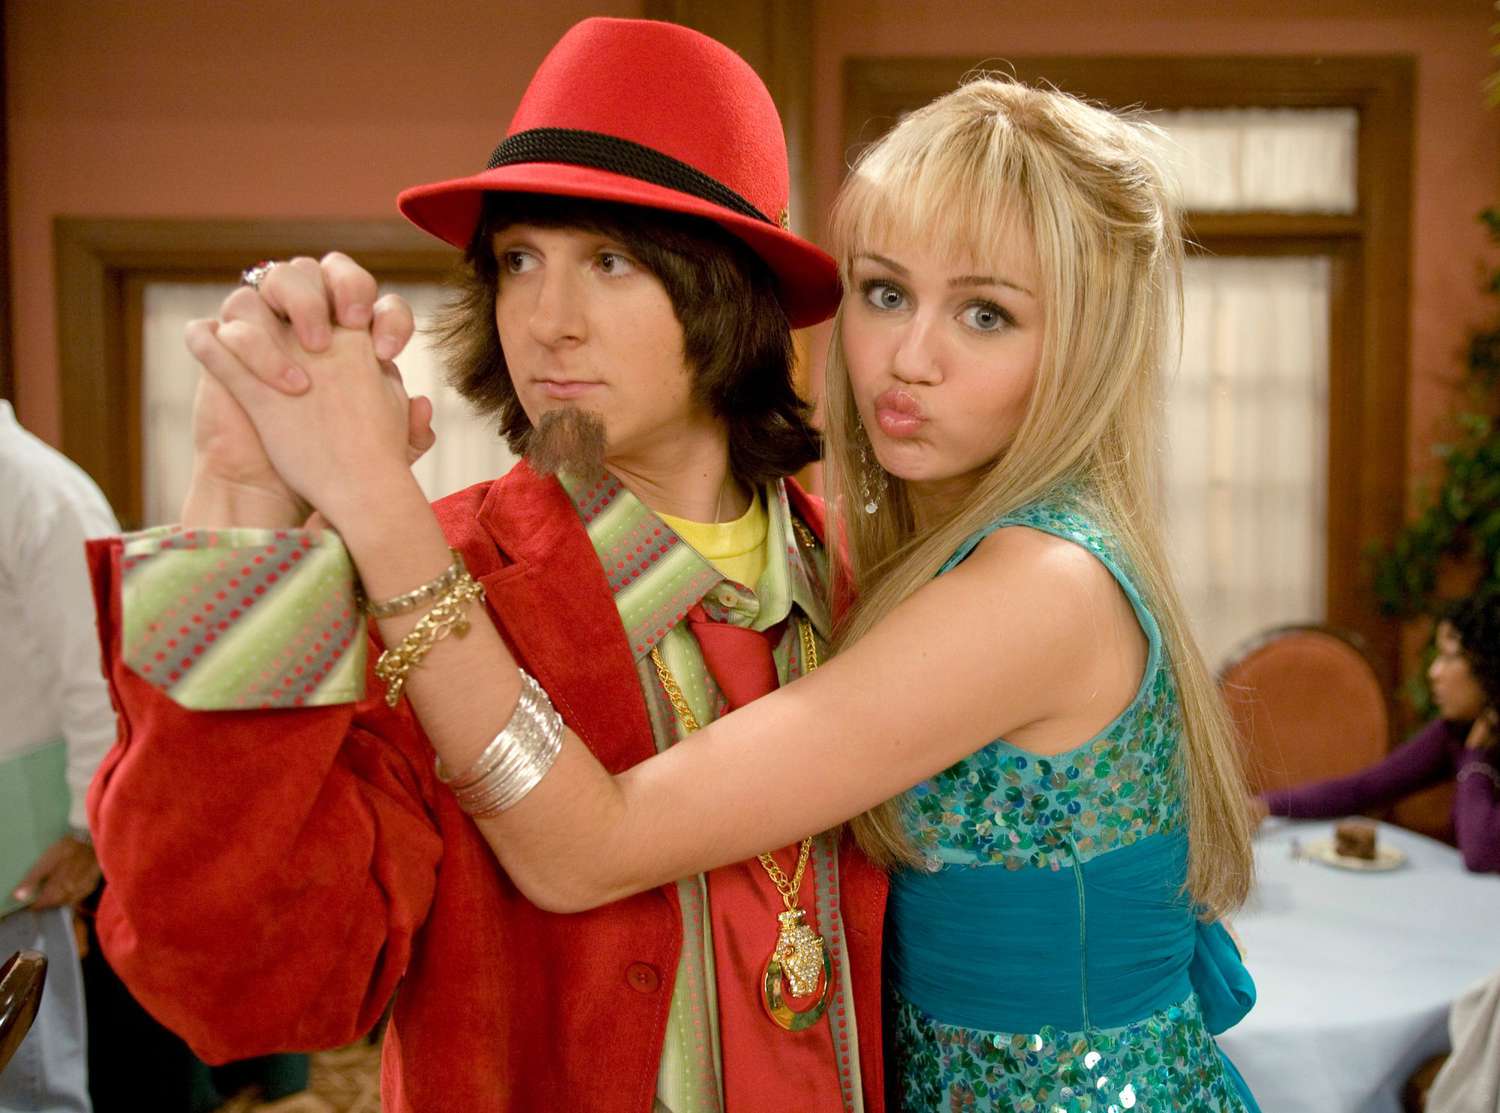 Mitchel Musso and Miley Cyrus in 'Hannah Montana'